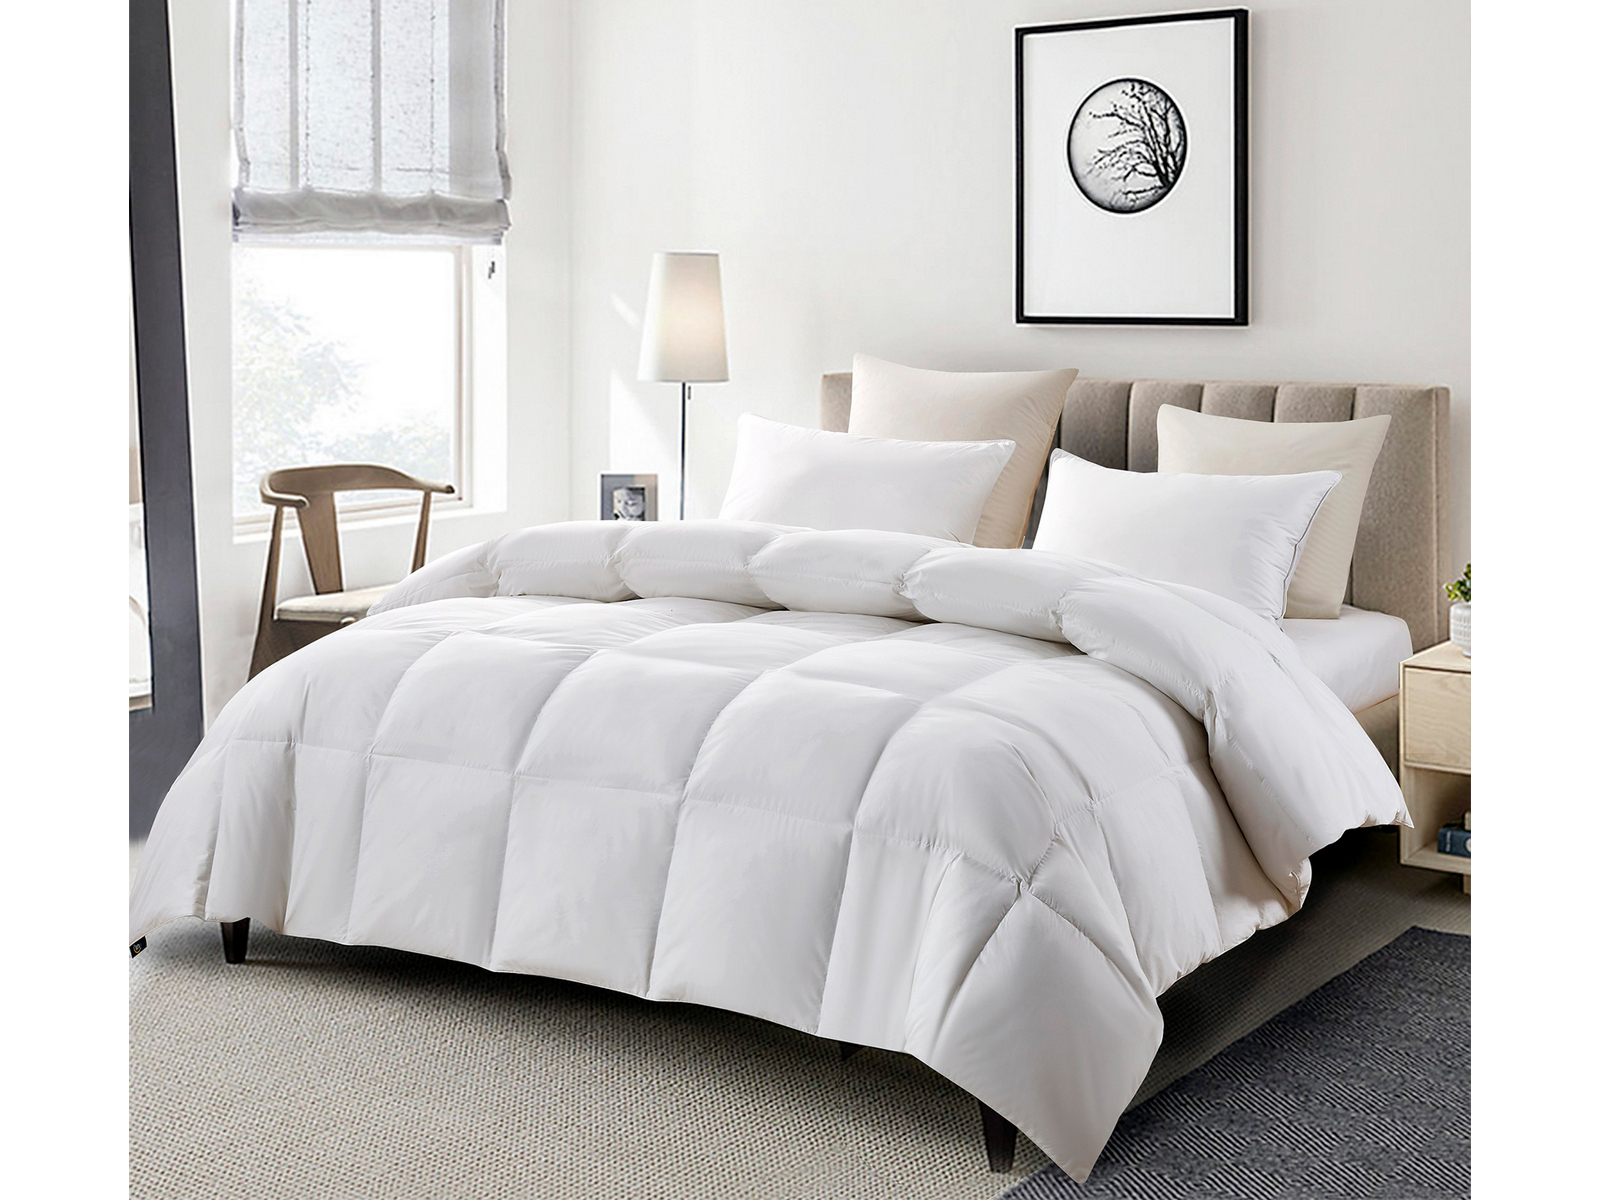 Serta Full/Queen Perfect Sleeper All Season Goose Feather and Down Fiber Comforter